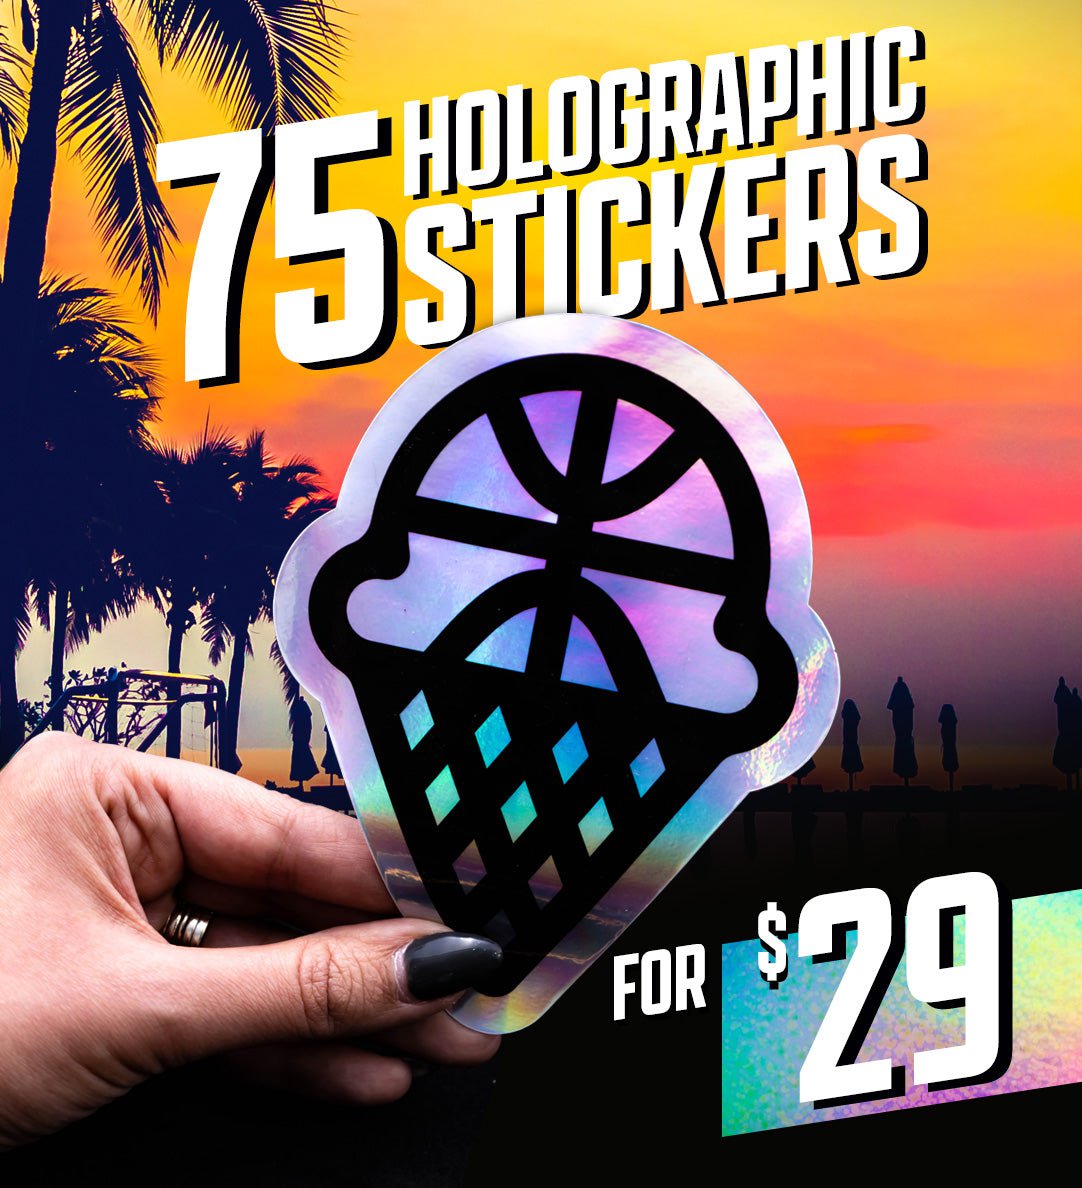 Custom iridescent holographic stickers promotional graphic